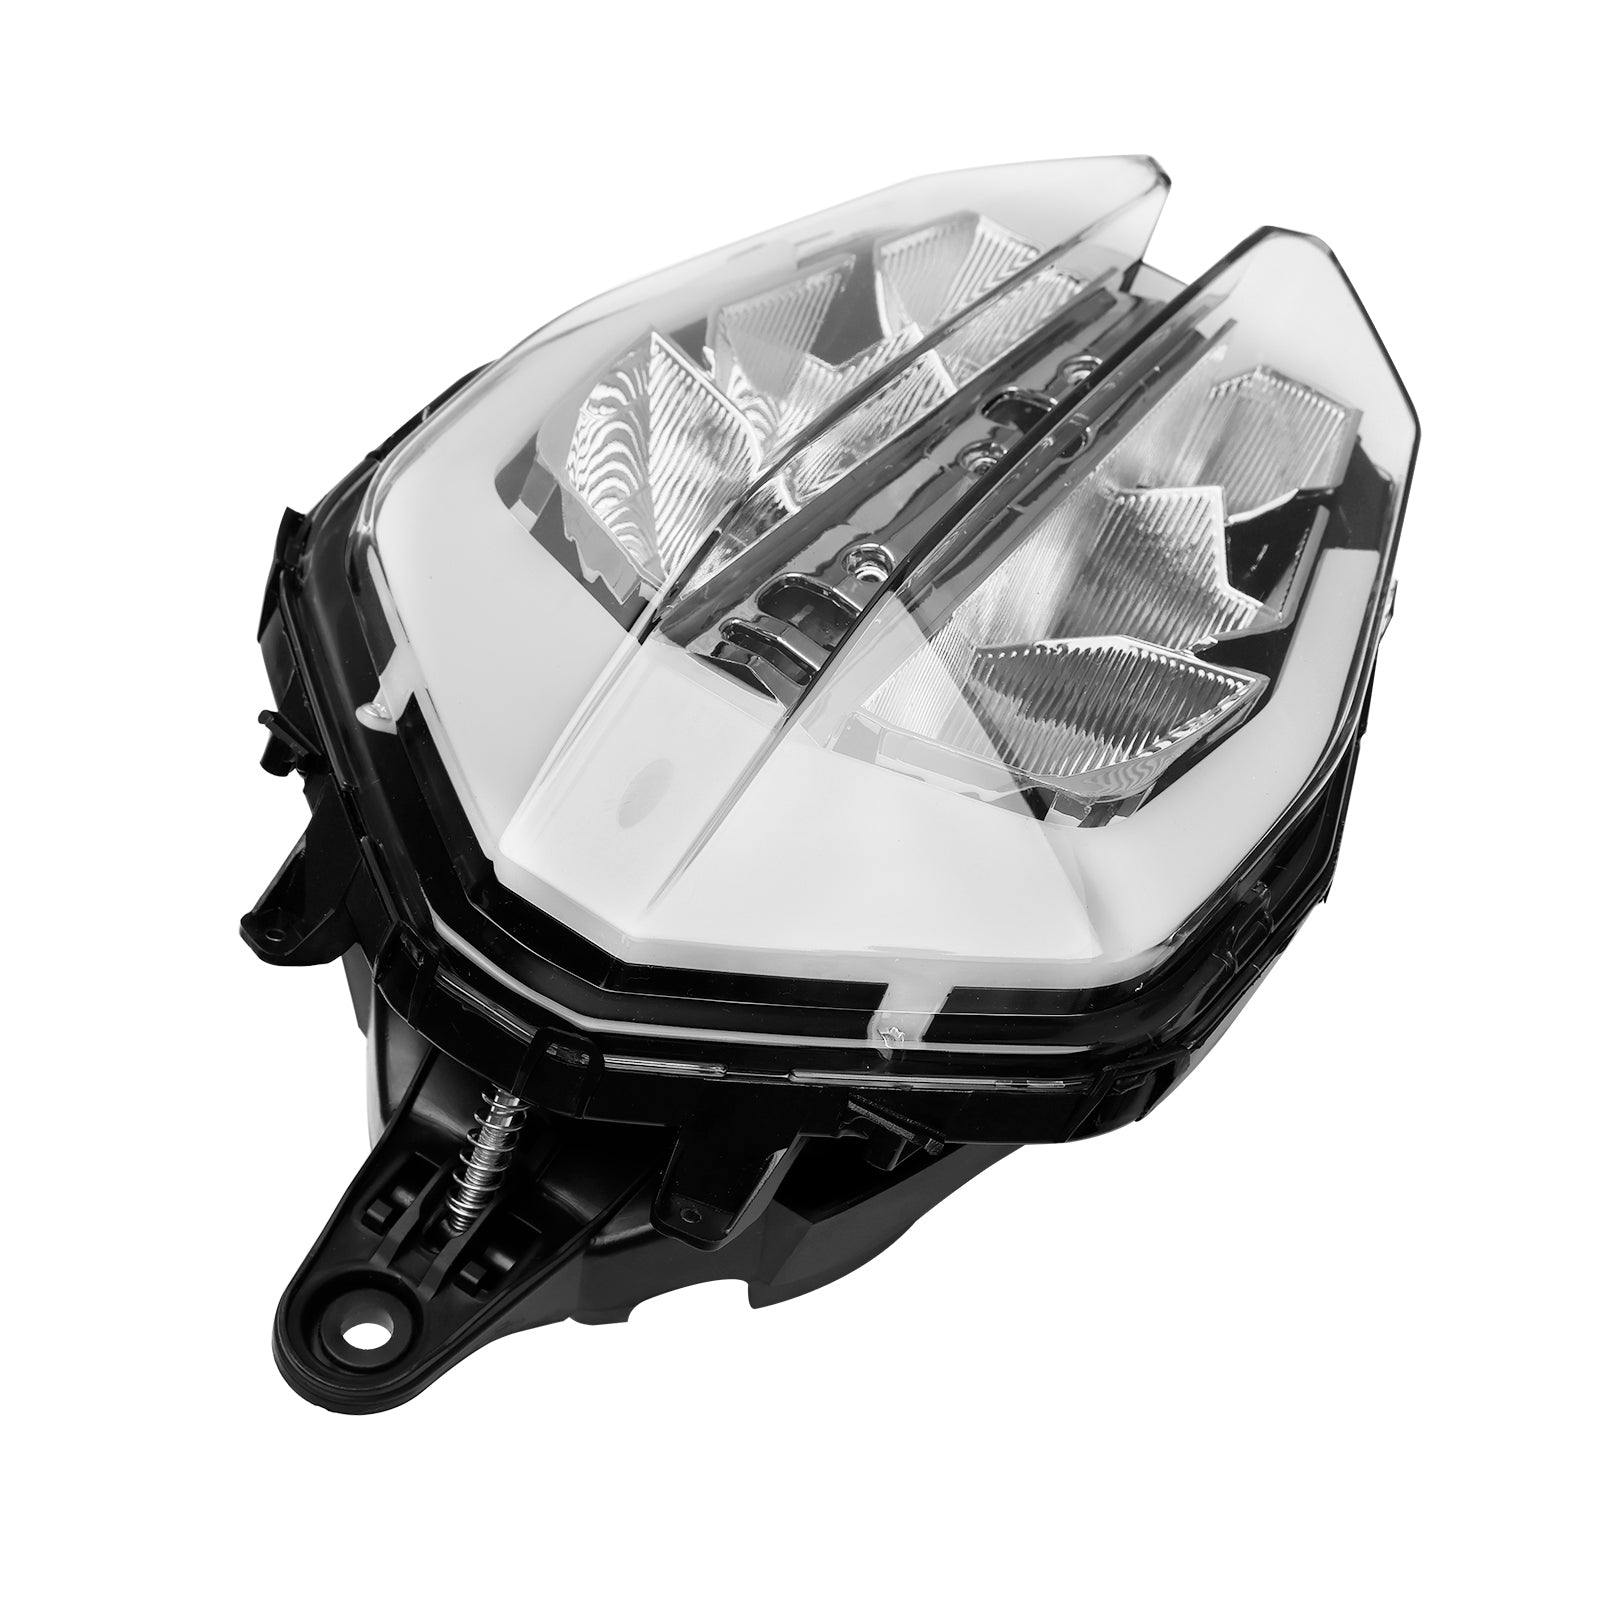 Front Headlight Grille Headlamp Led Protector Plastic Clear For 390 2018-2019